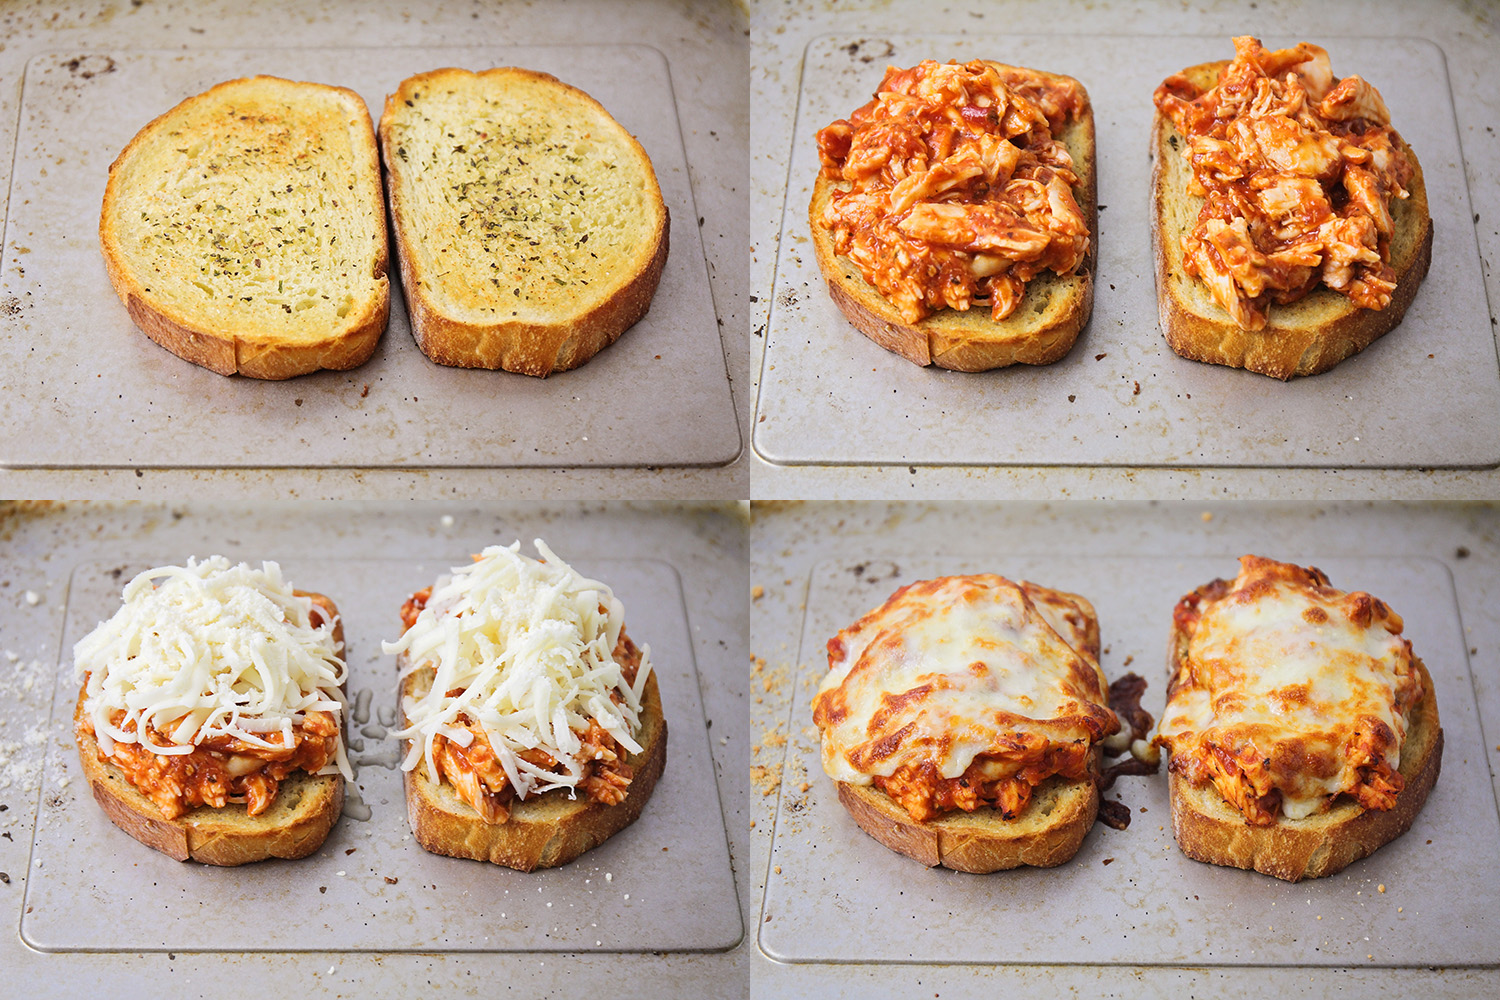 These simple and quick open faced chicken parmesan sandwiches are so easy to make, and full of flavor!